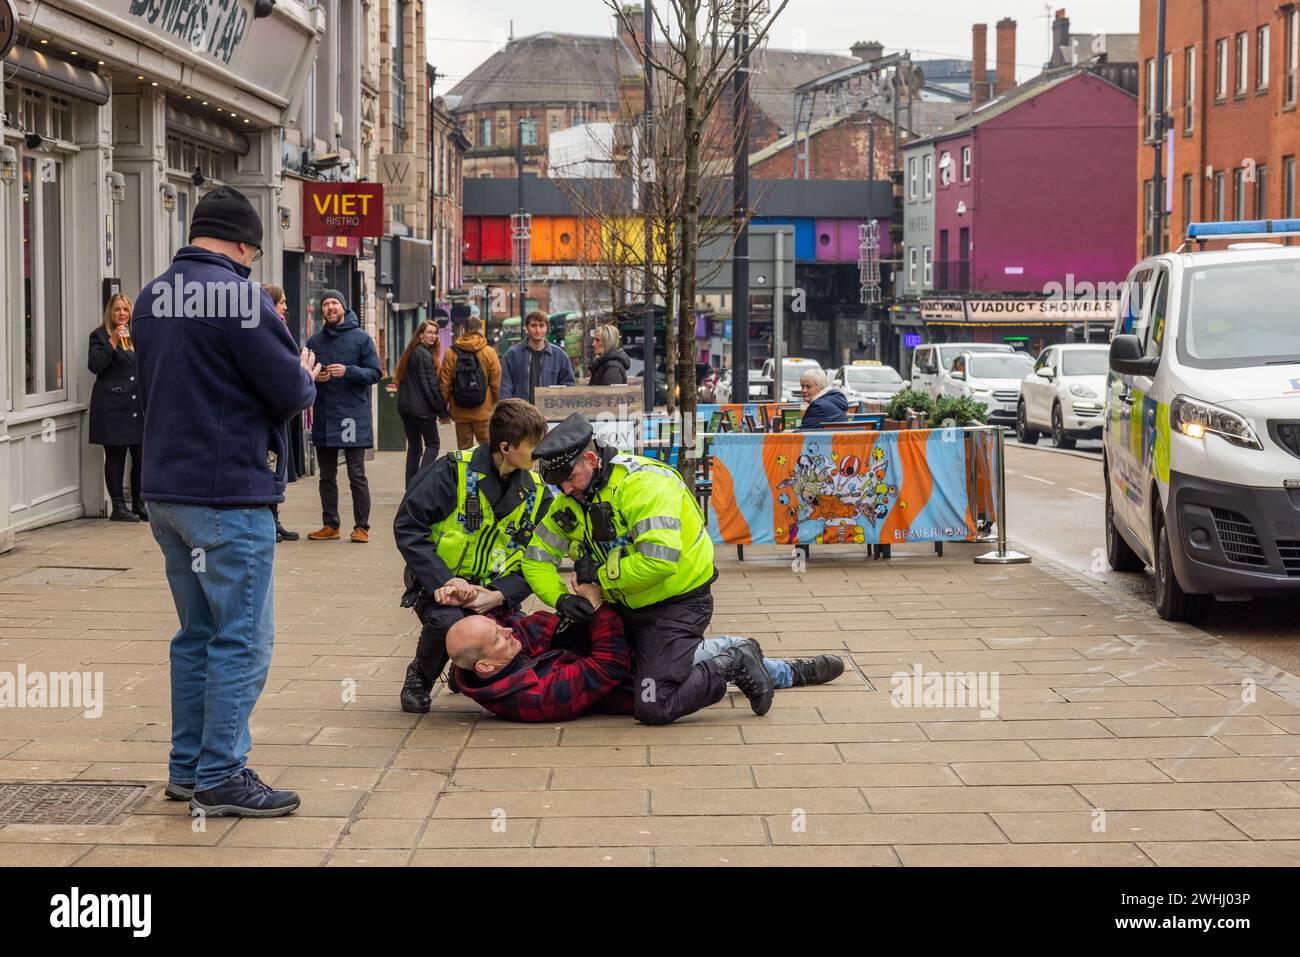 Leeds, UK. 10 FEB, 2024. Man is arrested in Leeds after getting into altercation with police following accusations he had shouted offensive language towards palestine protest that marched through the city center, police repeately asked the man for his name and address before he tried to flee and resist arrest. Credit Milo Chandler/Alamy Live News Stock Photo